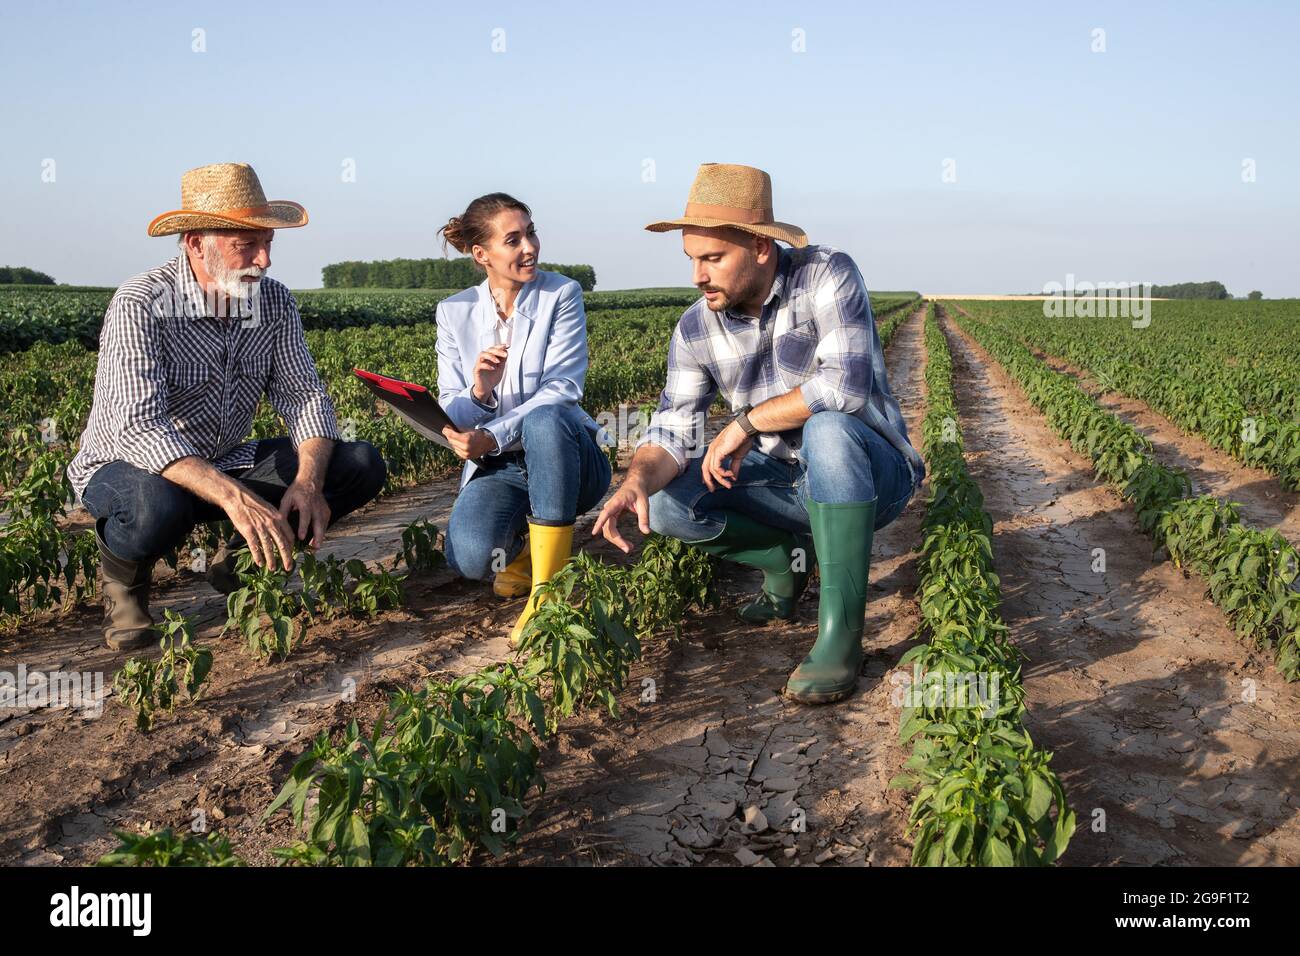 Three people crouching in vegetable field looking at crops discussing. Two male farmers showing pepper plant to female agronomist insurance sales rep Stock Photo